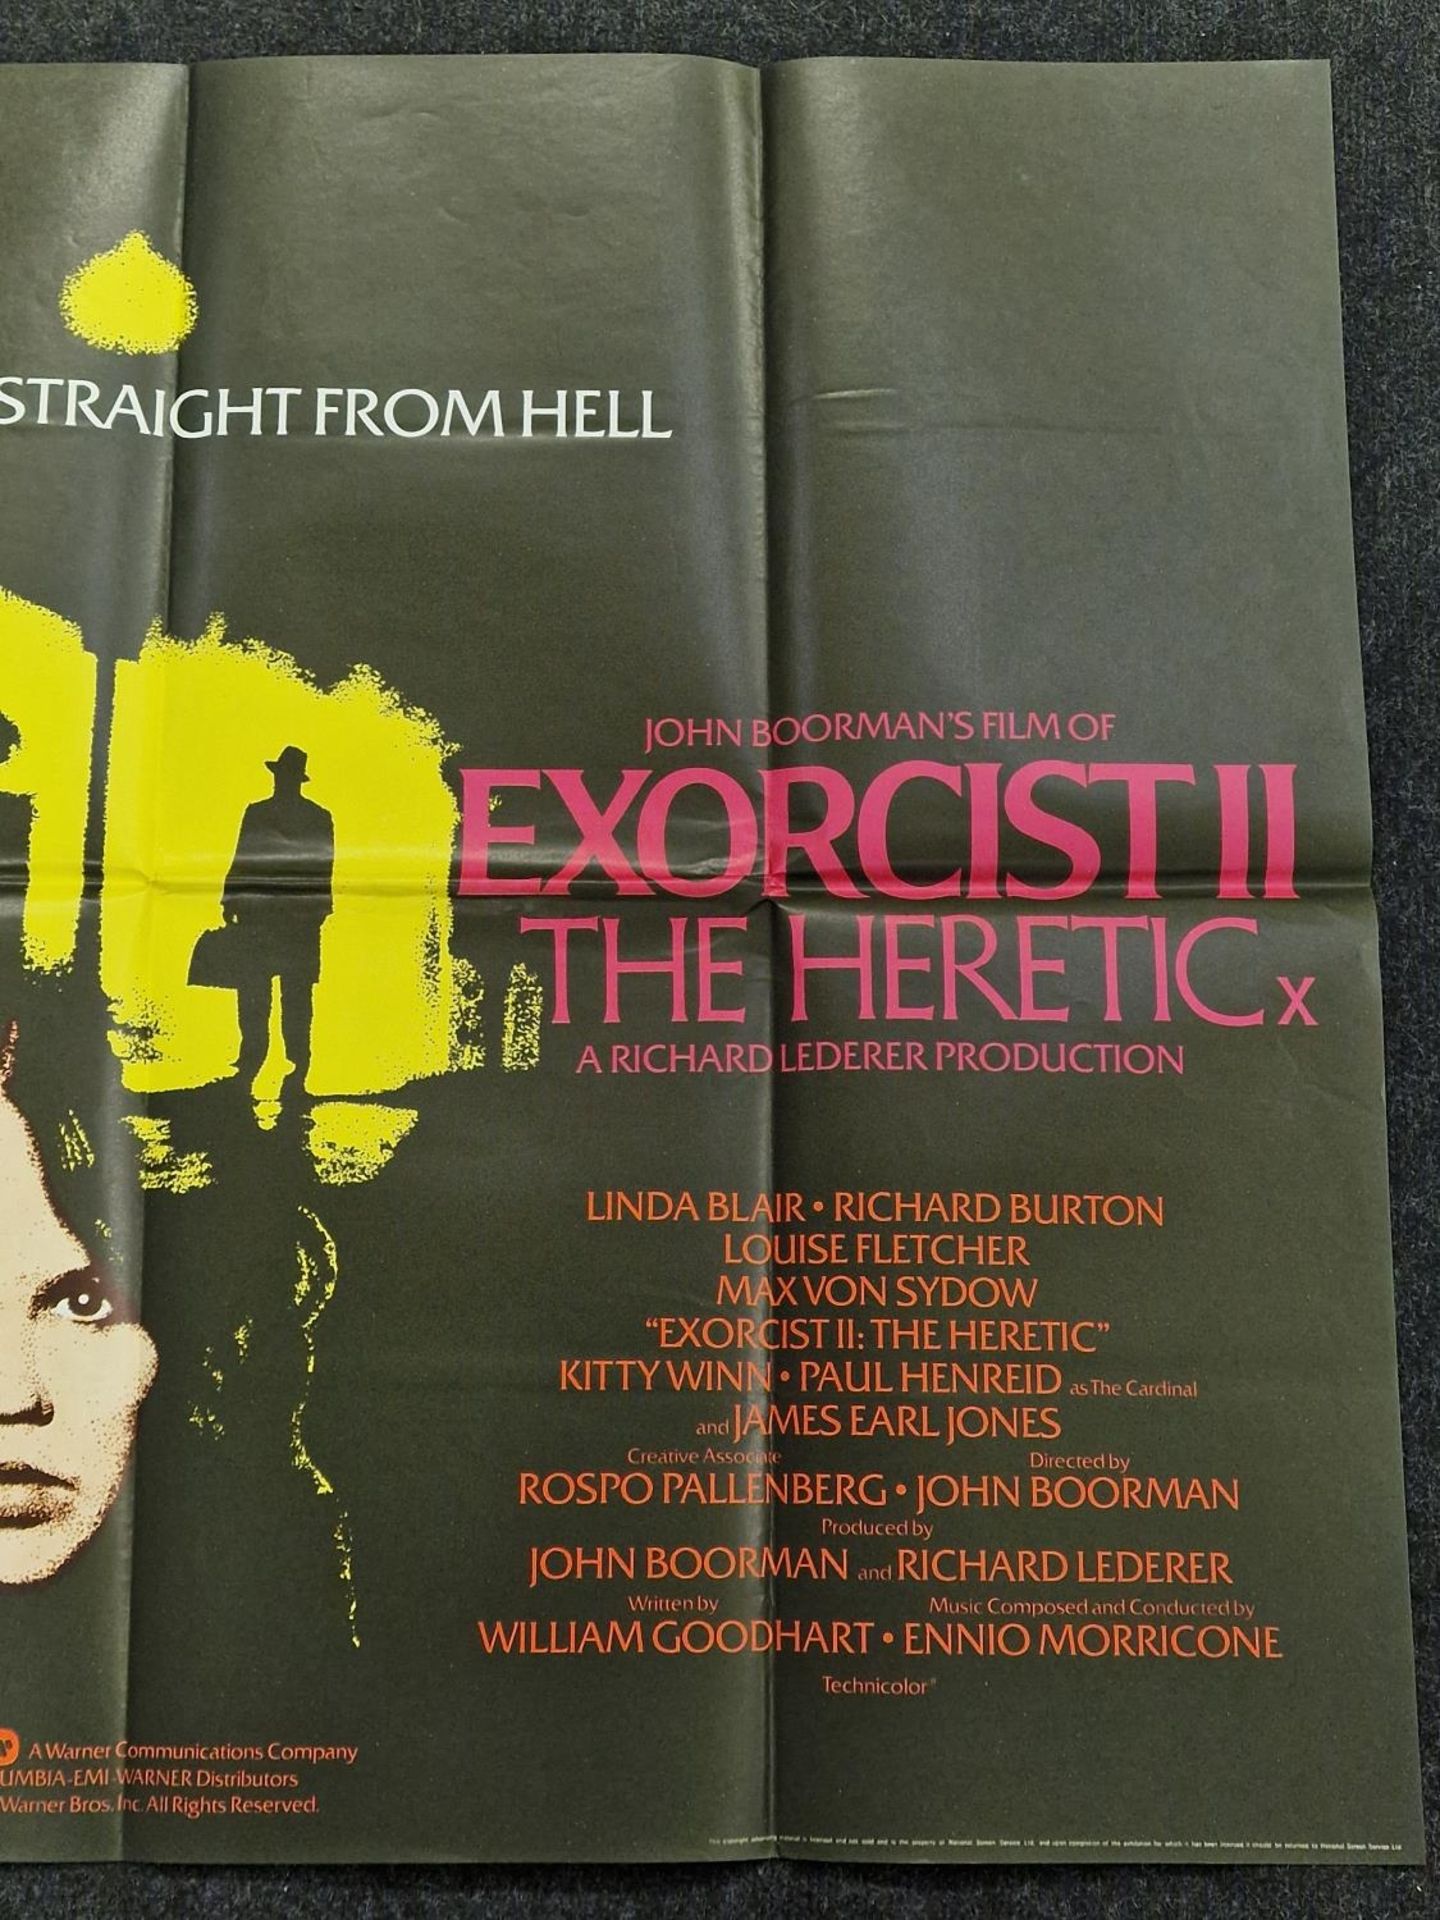 "The Exorcist and Exorcist II The Heretic" original vintage folded quad film poster 1980 starring - Image 3 of 5